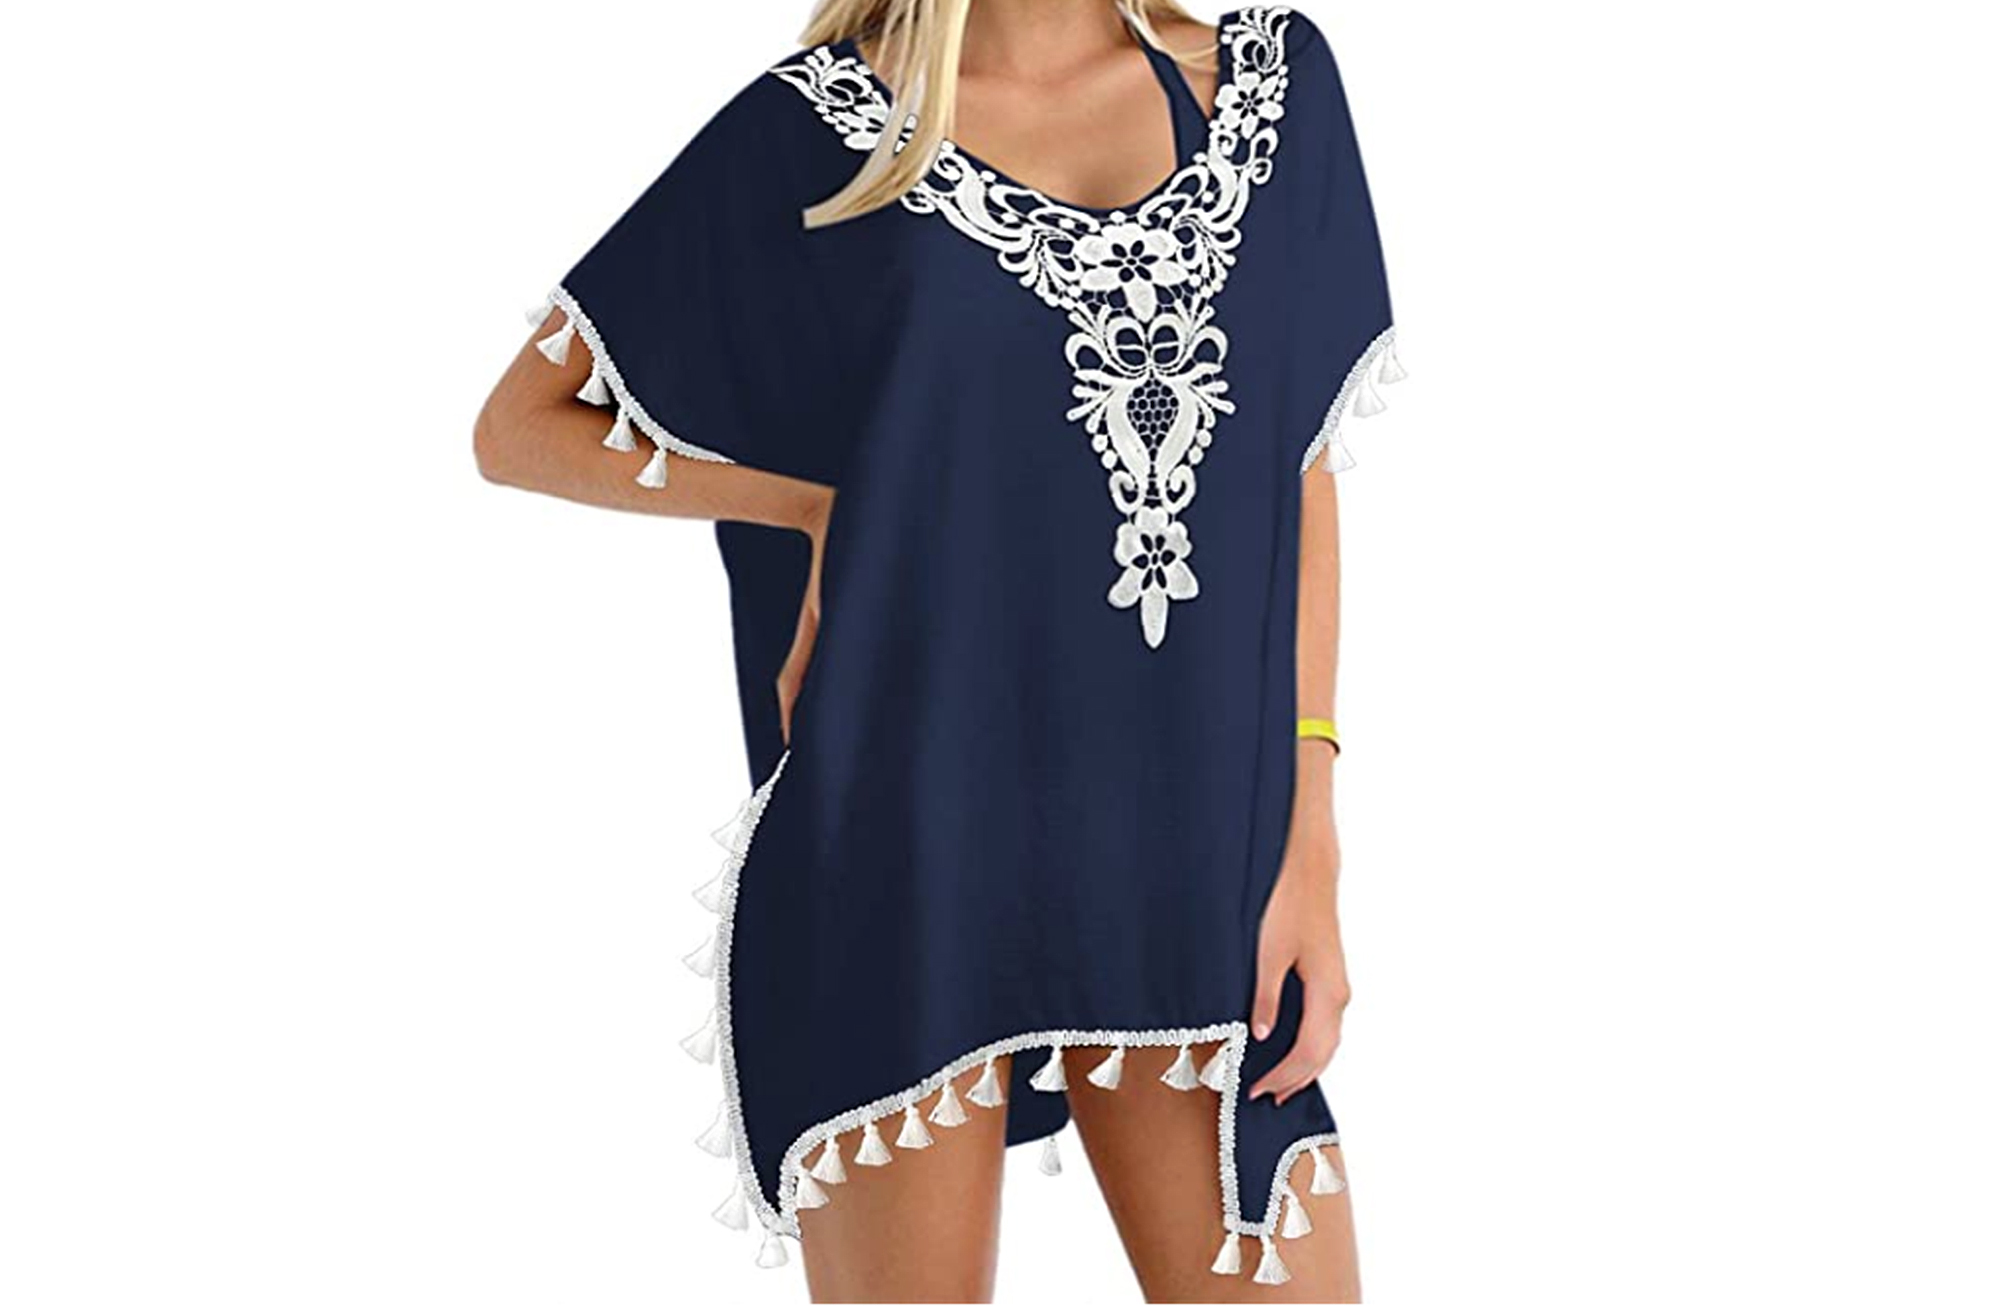 Amazon Bestselling Beach Swim Cover-Up Is on Sale Right Now